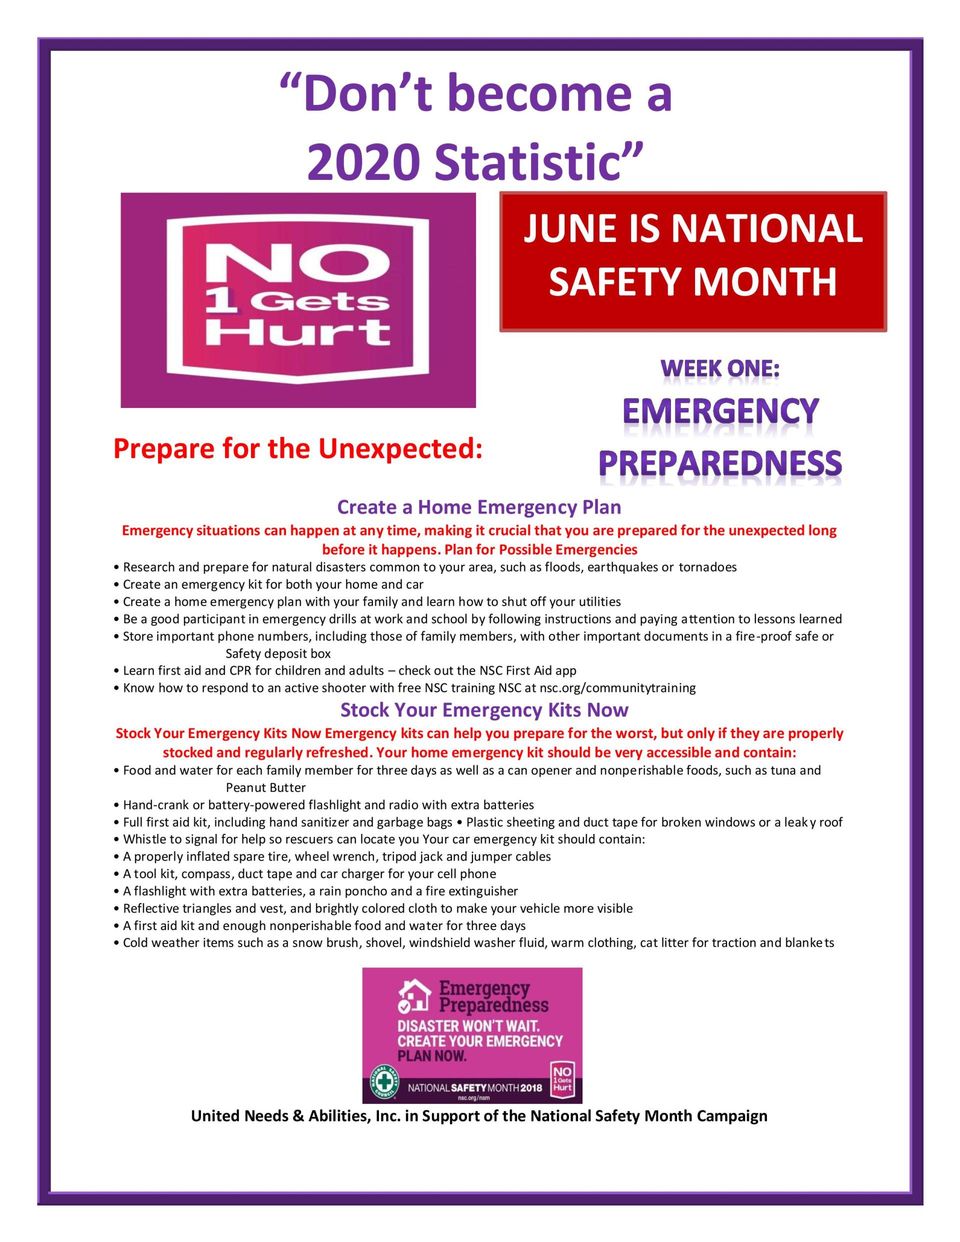 June is National Safety Month: Week One (Emergency Preparedness) graphic